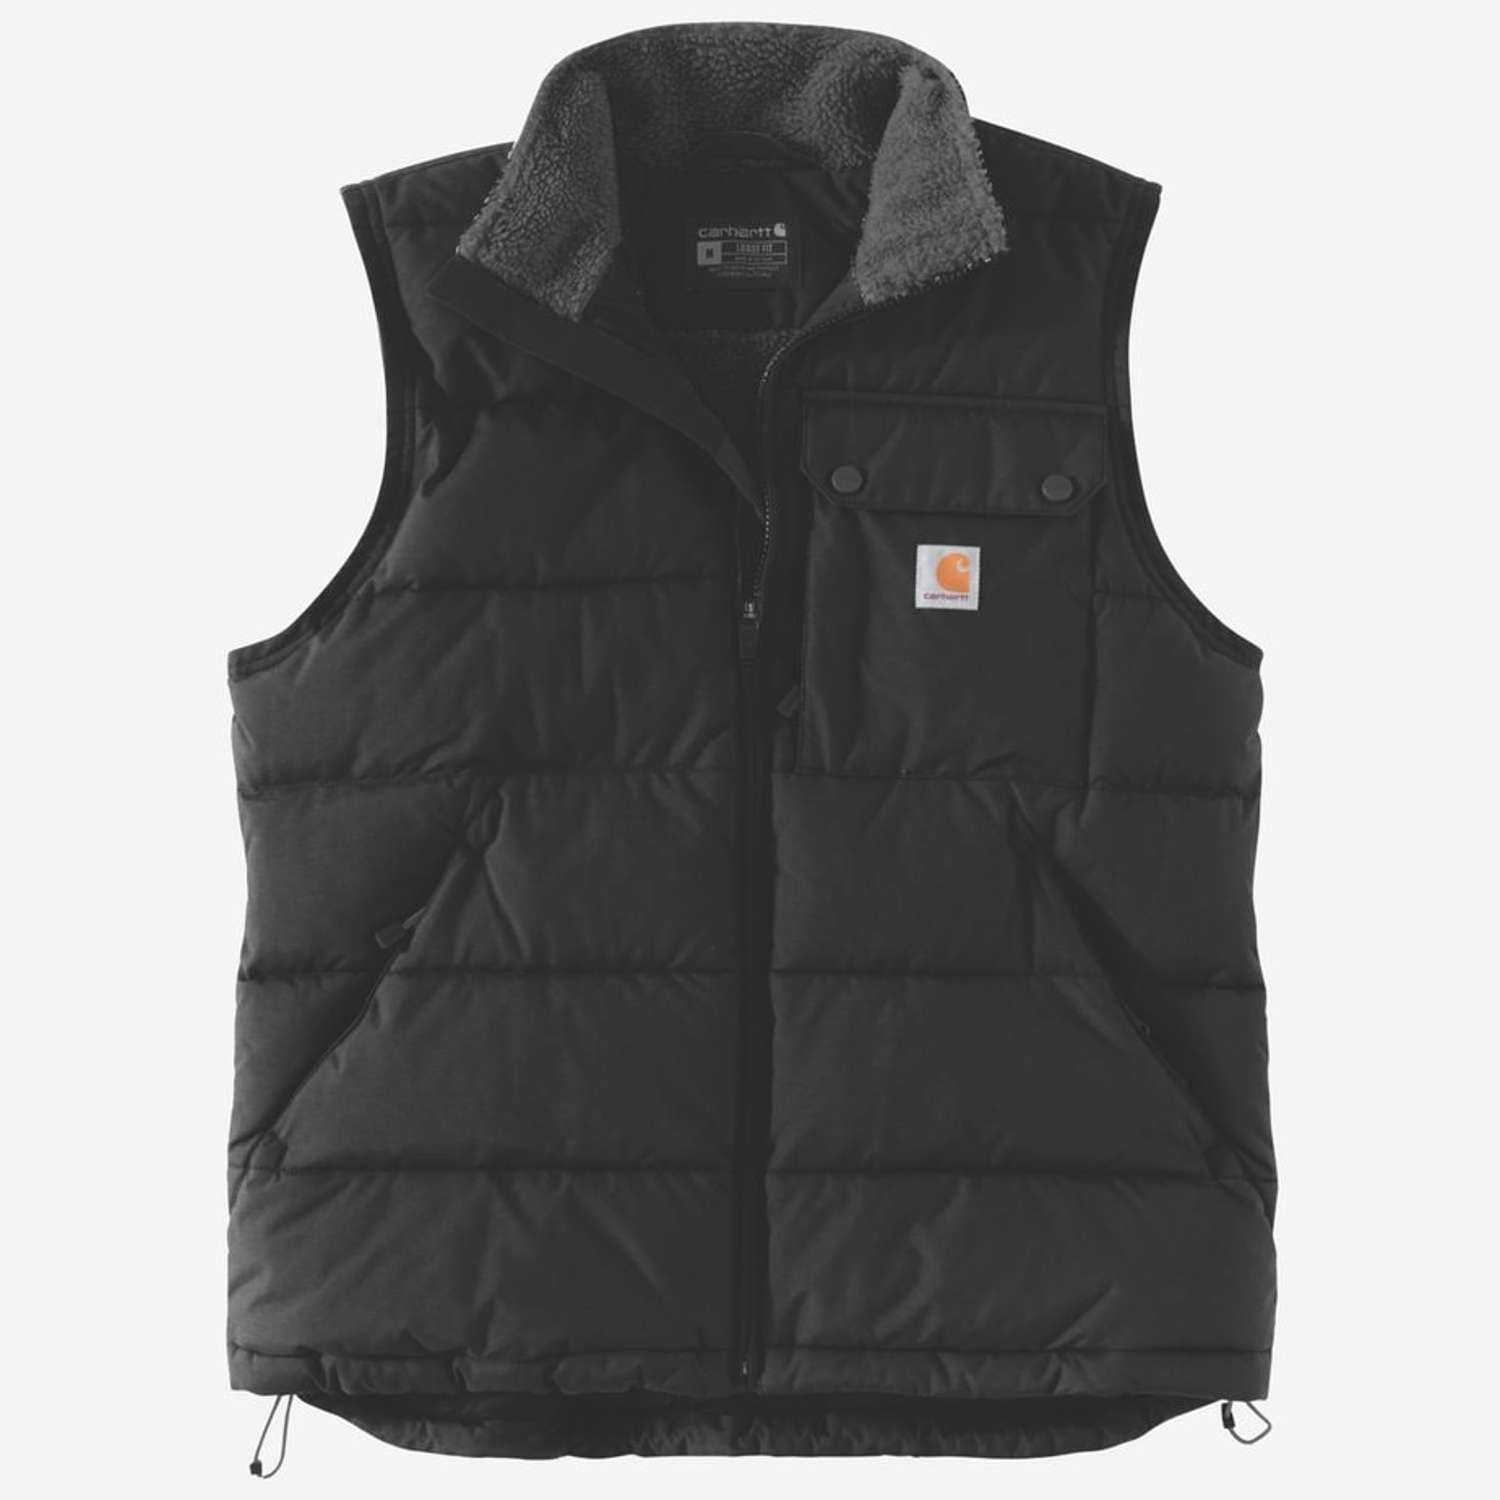 Se CARHARTT Loose Fit Midweight Insulated Vest BLACK - S hos Toolster.dk